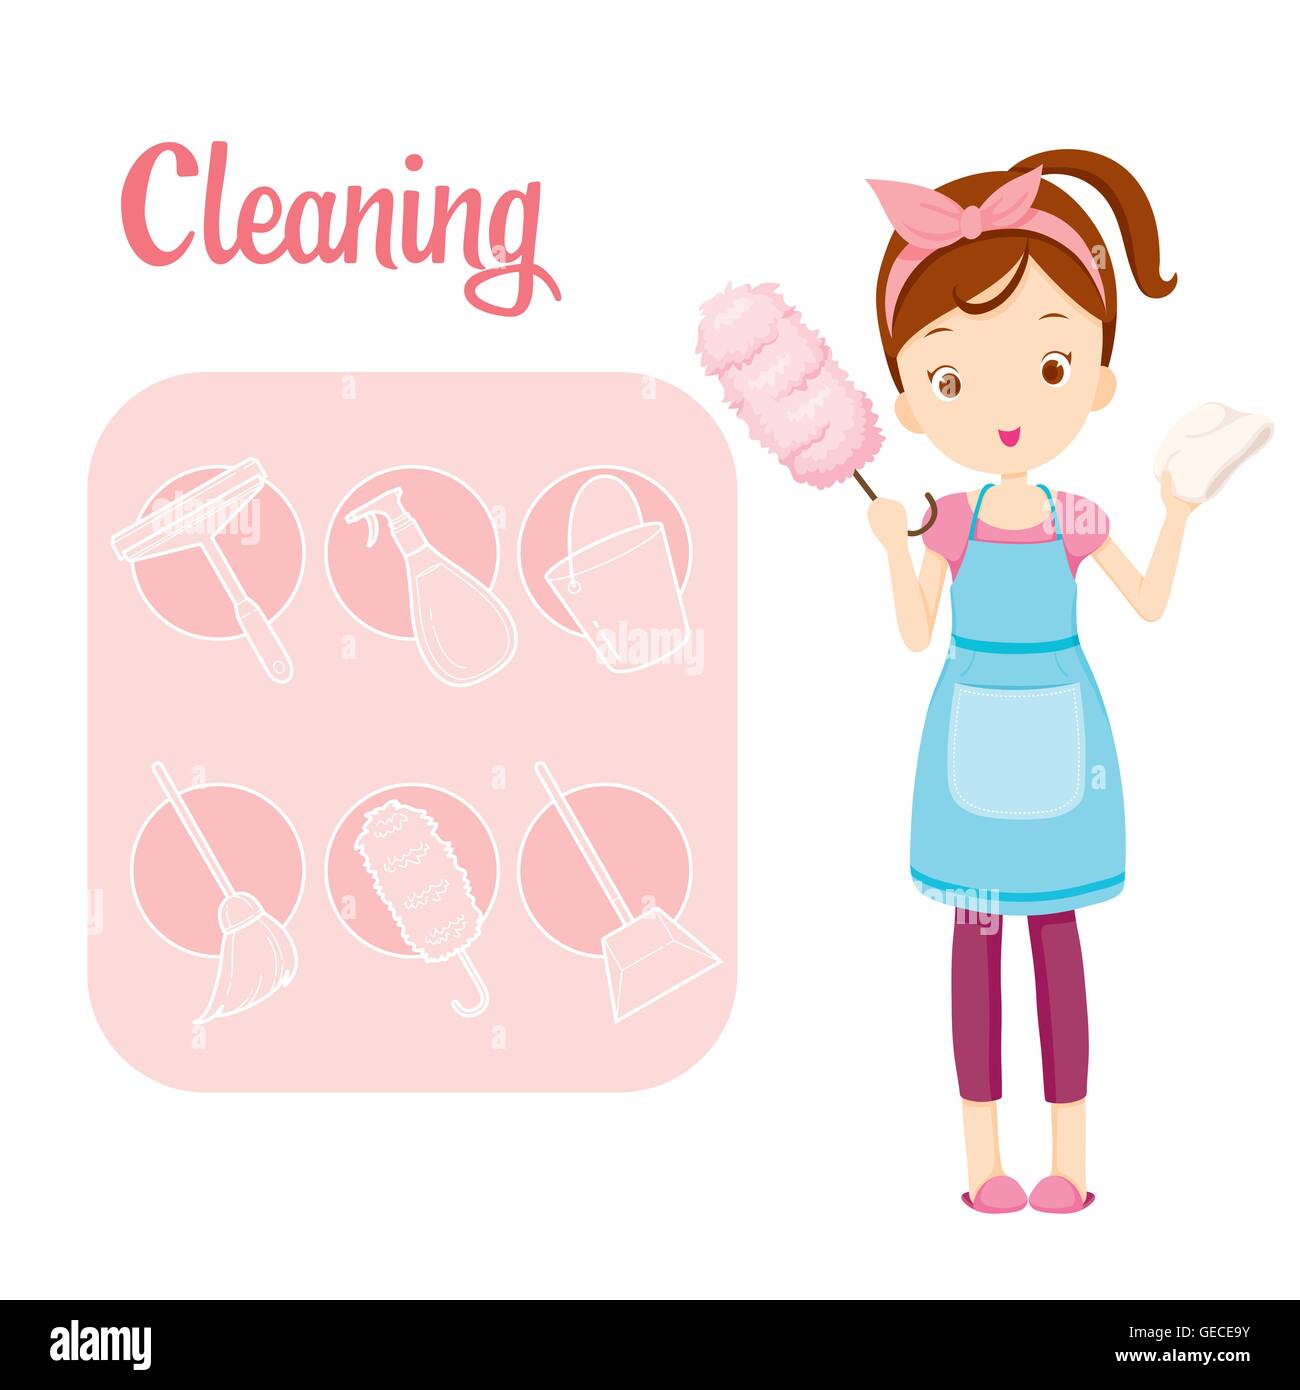 https://c8.alamy.com/comp/GECE9Y/girl-with-house-cleaning-equipment-and-outline-icons-set-housework-GECE9Y.jpg